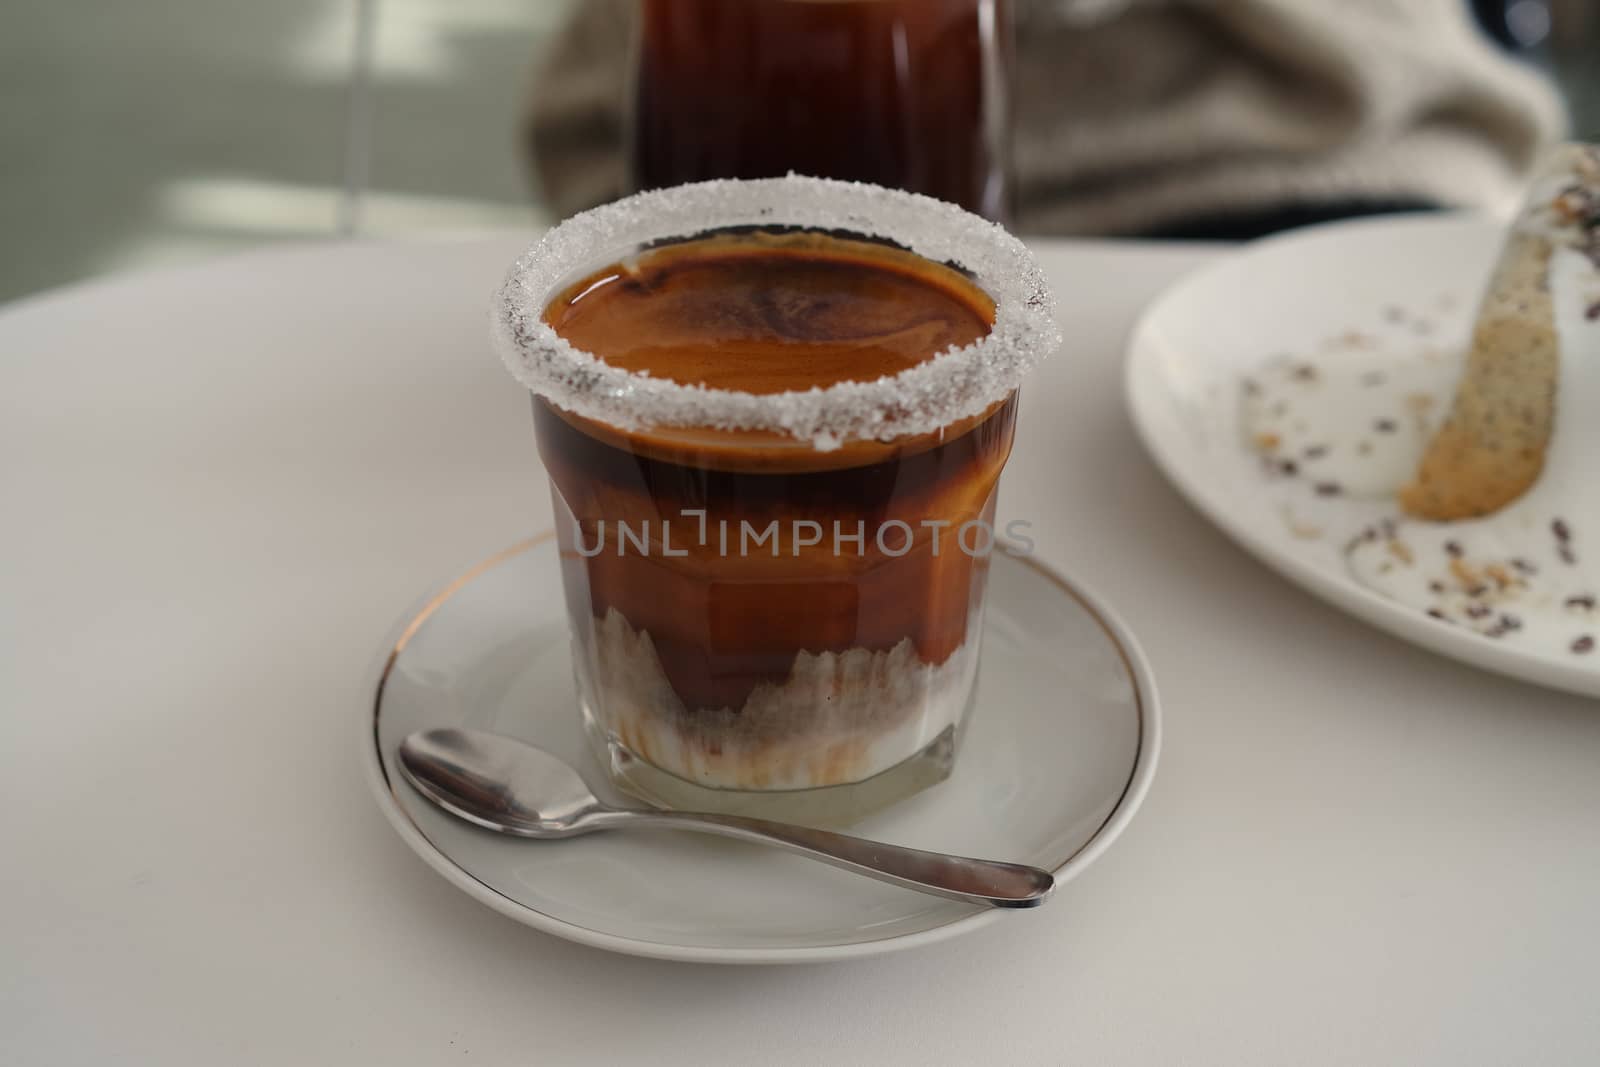 Spoon and cup of coffee on table